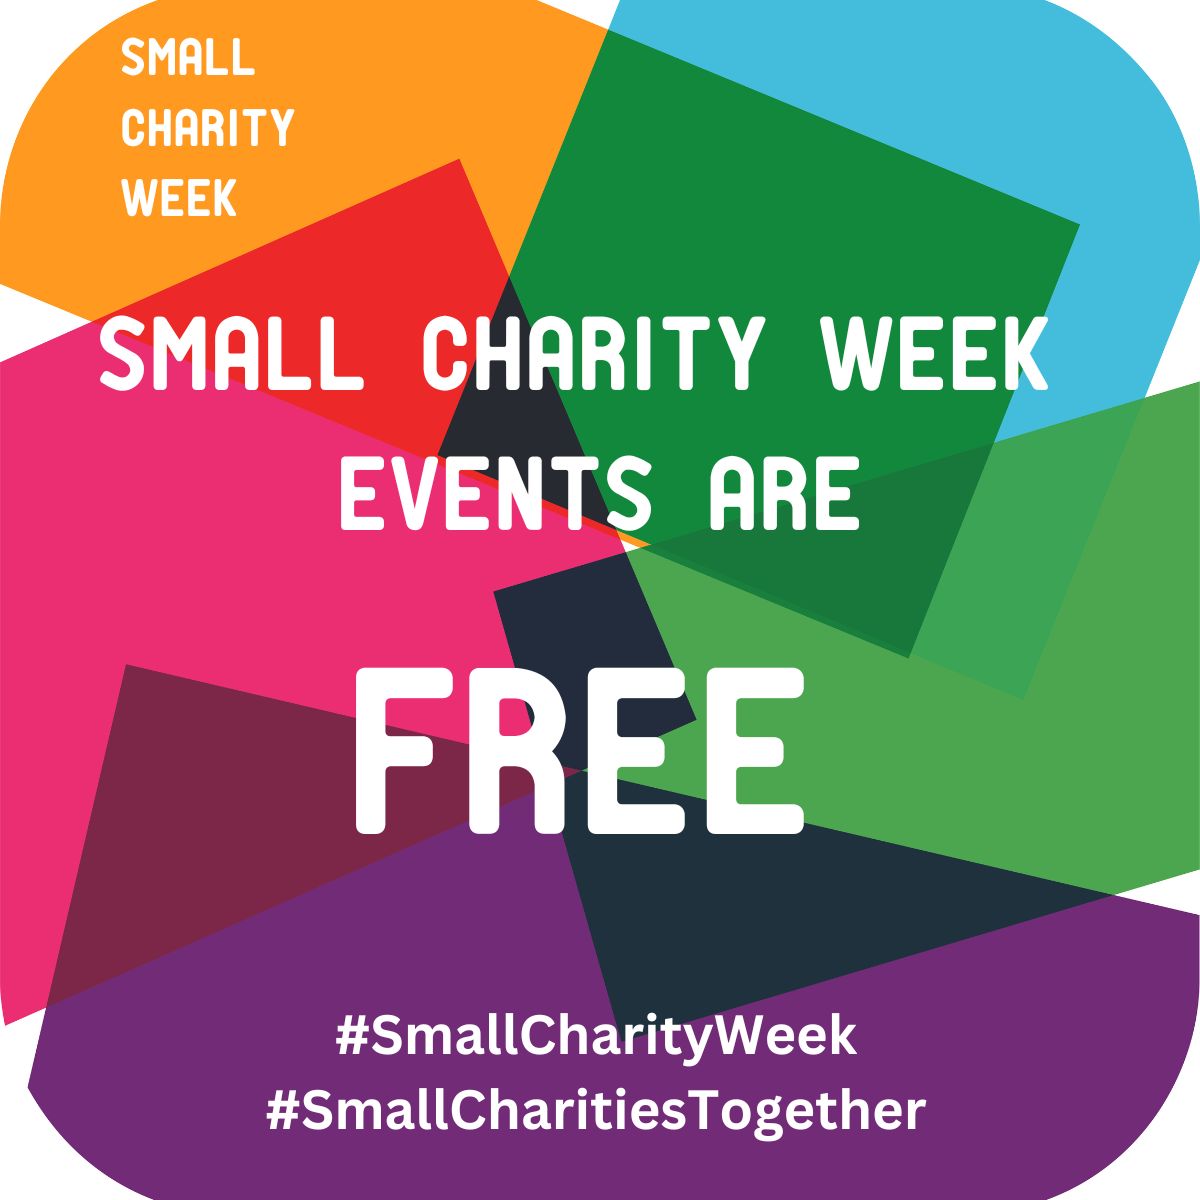 FREE FREE FREE 

Yes, that's right - all the co-created events we have announced this week are completely and utterly FREE to attend. 

So what are you waiting for? Get booking. bit.ly/SCW_events 

We can't wait to see you all. 

#SmallCharityWeek #SmallCharitiesTogether